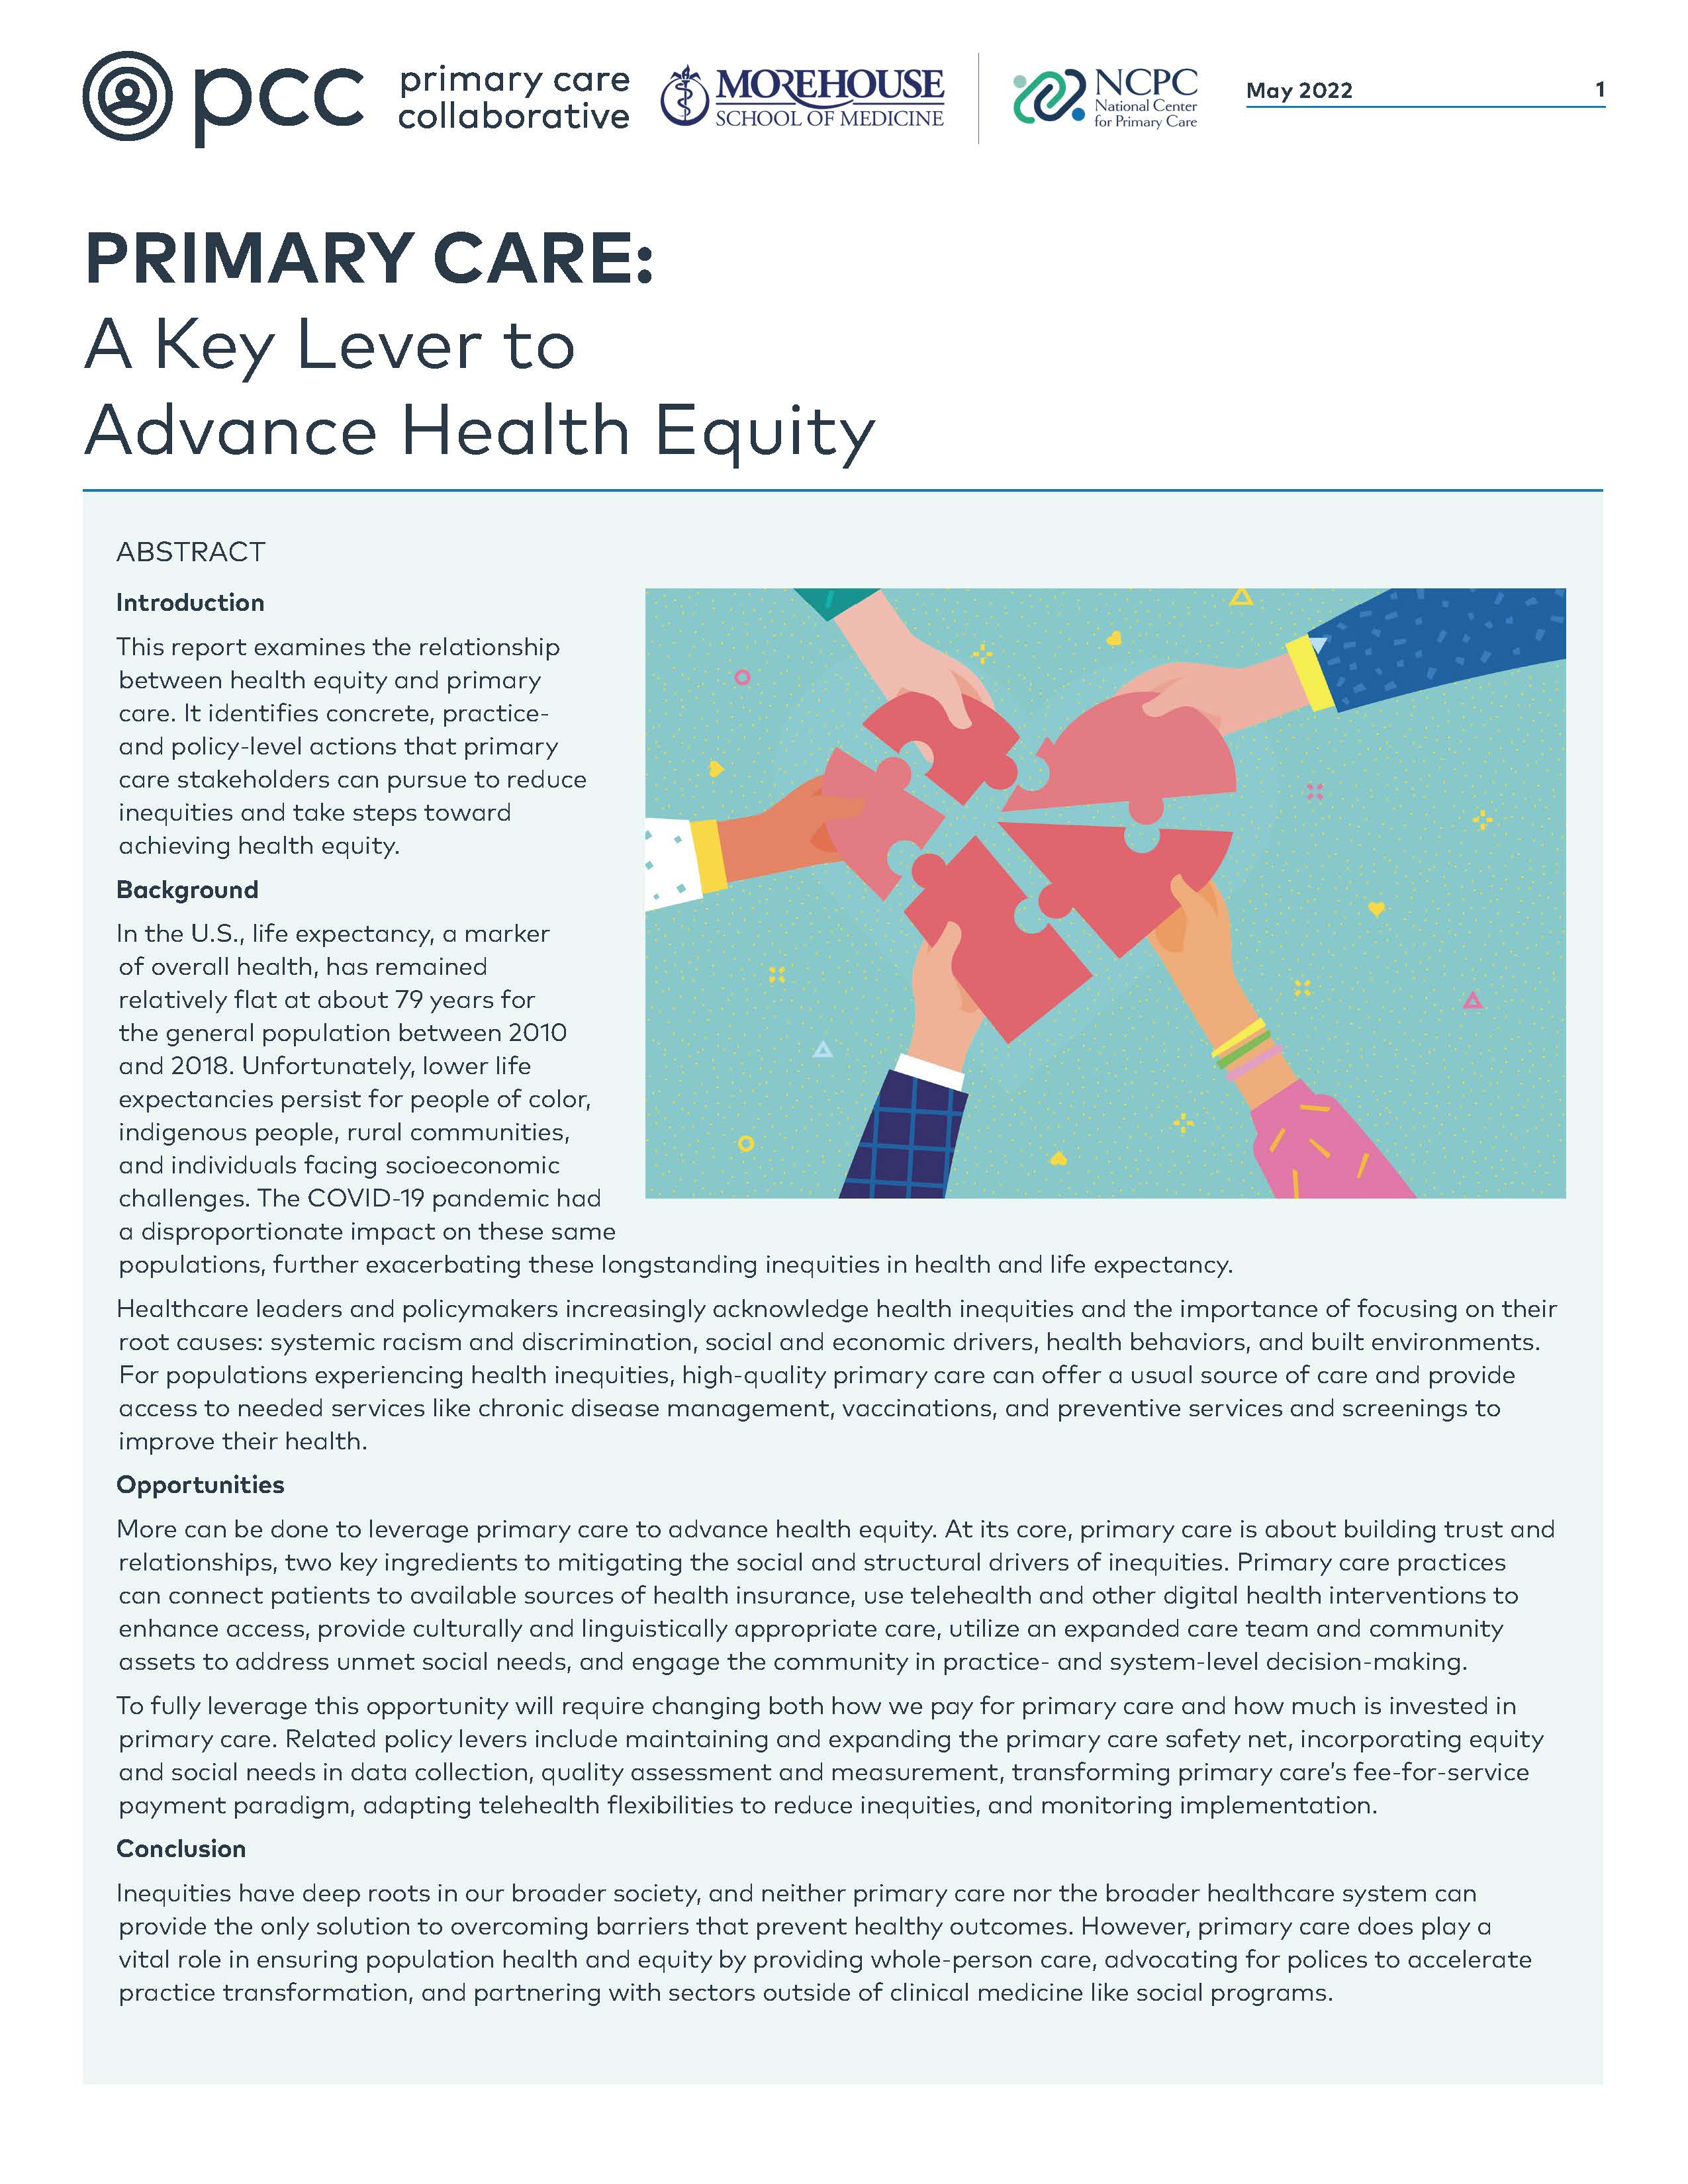 PRIMARY CARE: A Key Lever to Advance Health Equity